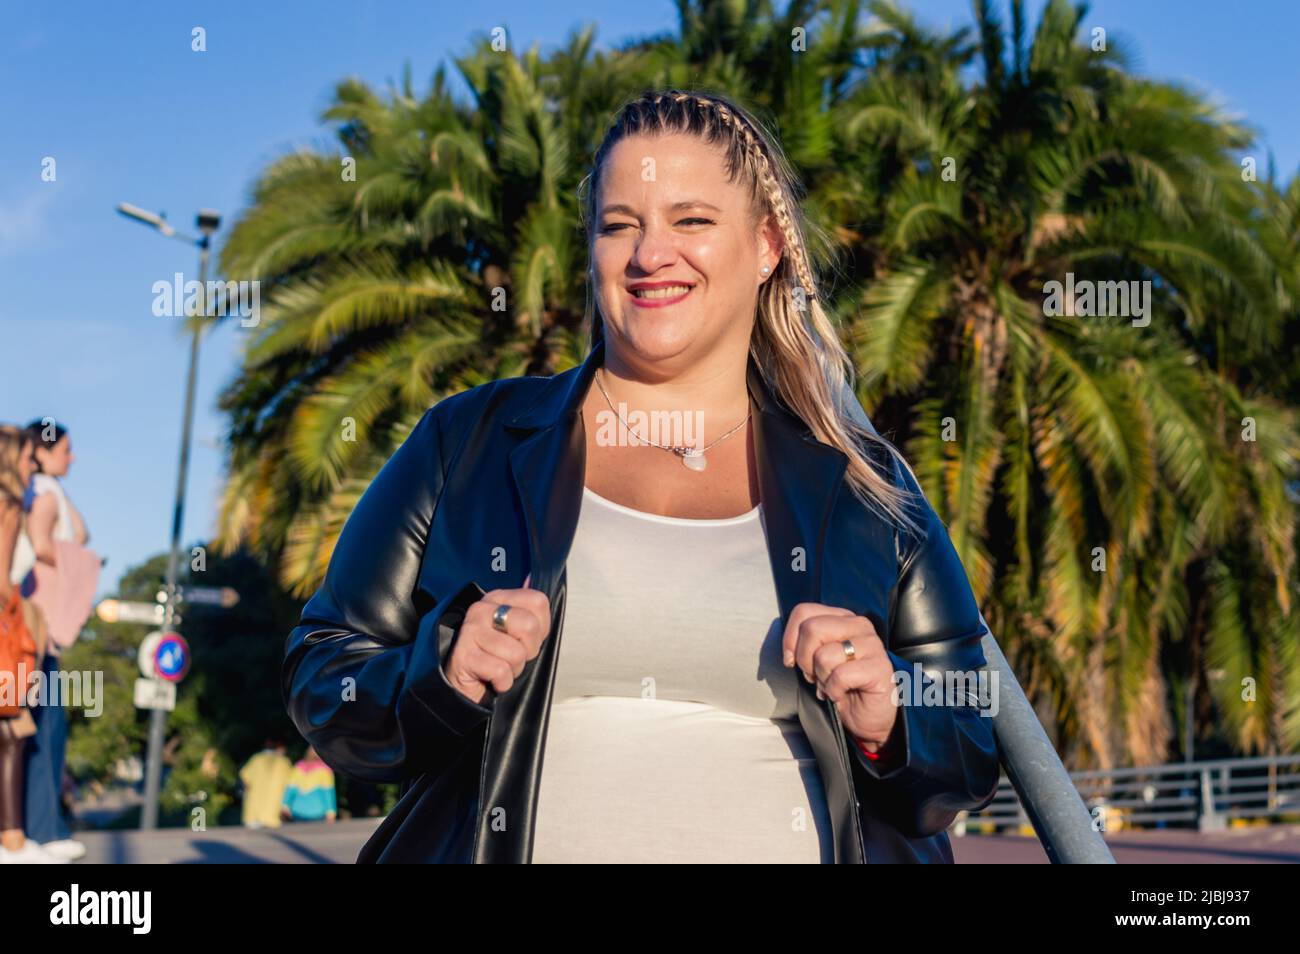 portrait argentinian blonde adult latin woman, standing outdoors holding jacket lapel with hands, looking at camera smiling, plus size model, lifestyl Stock Photo